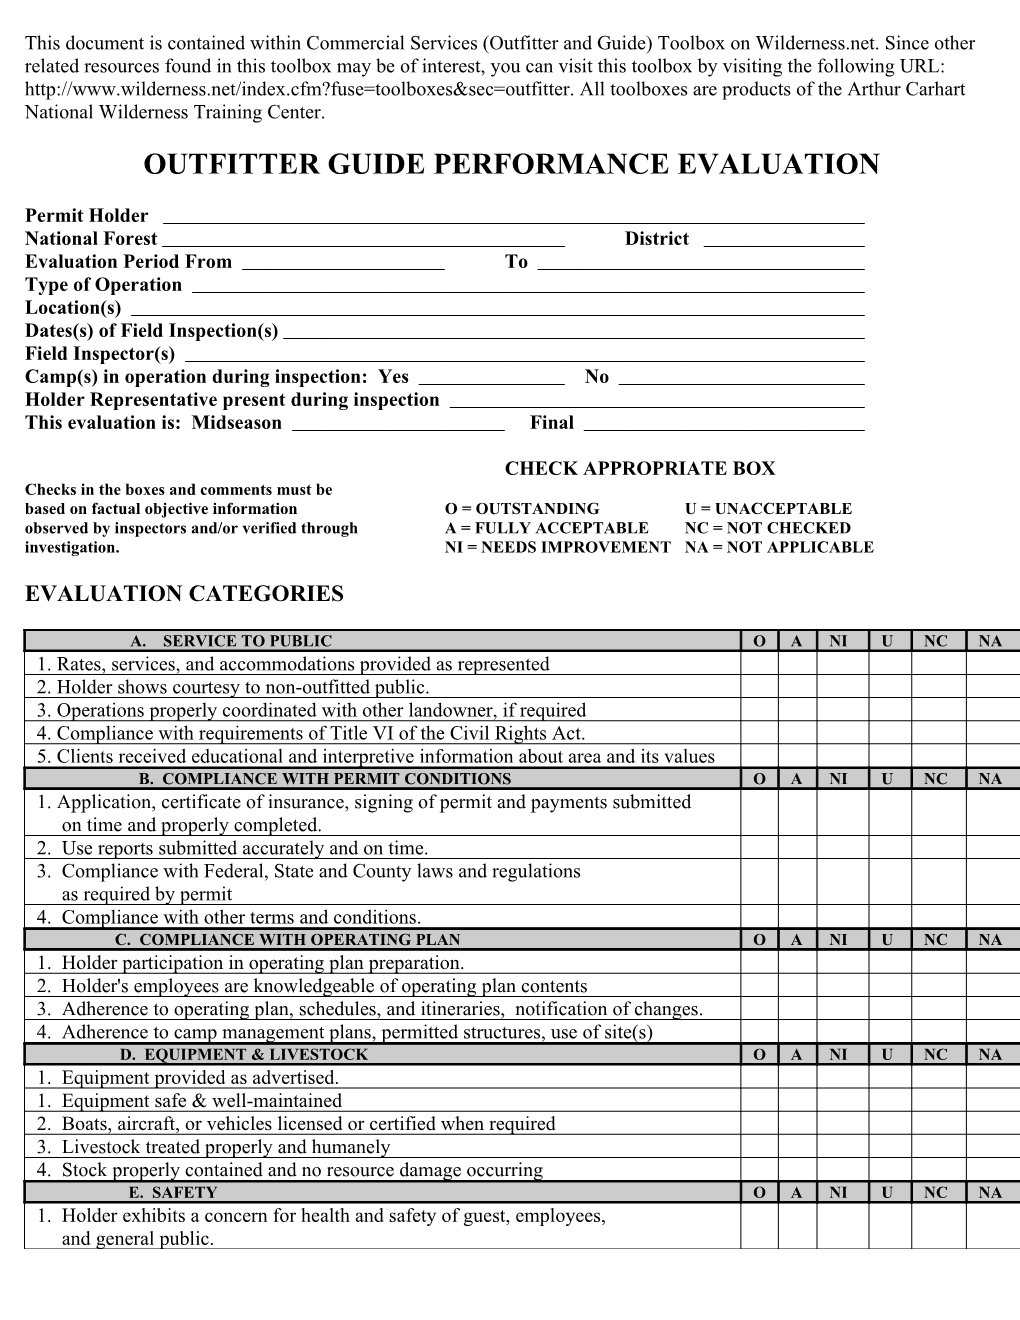 Outfitter Guide Performance Evaluation